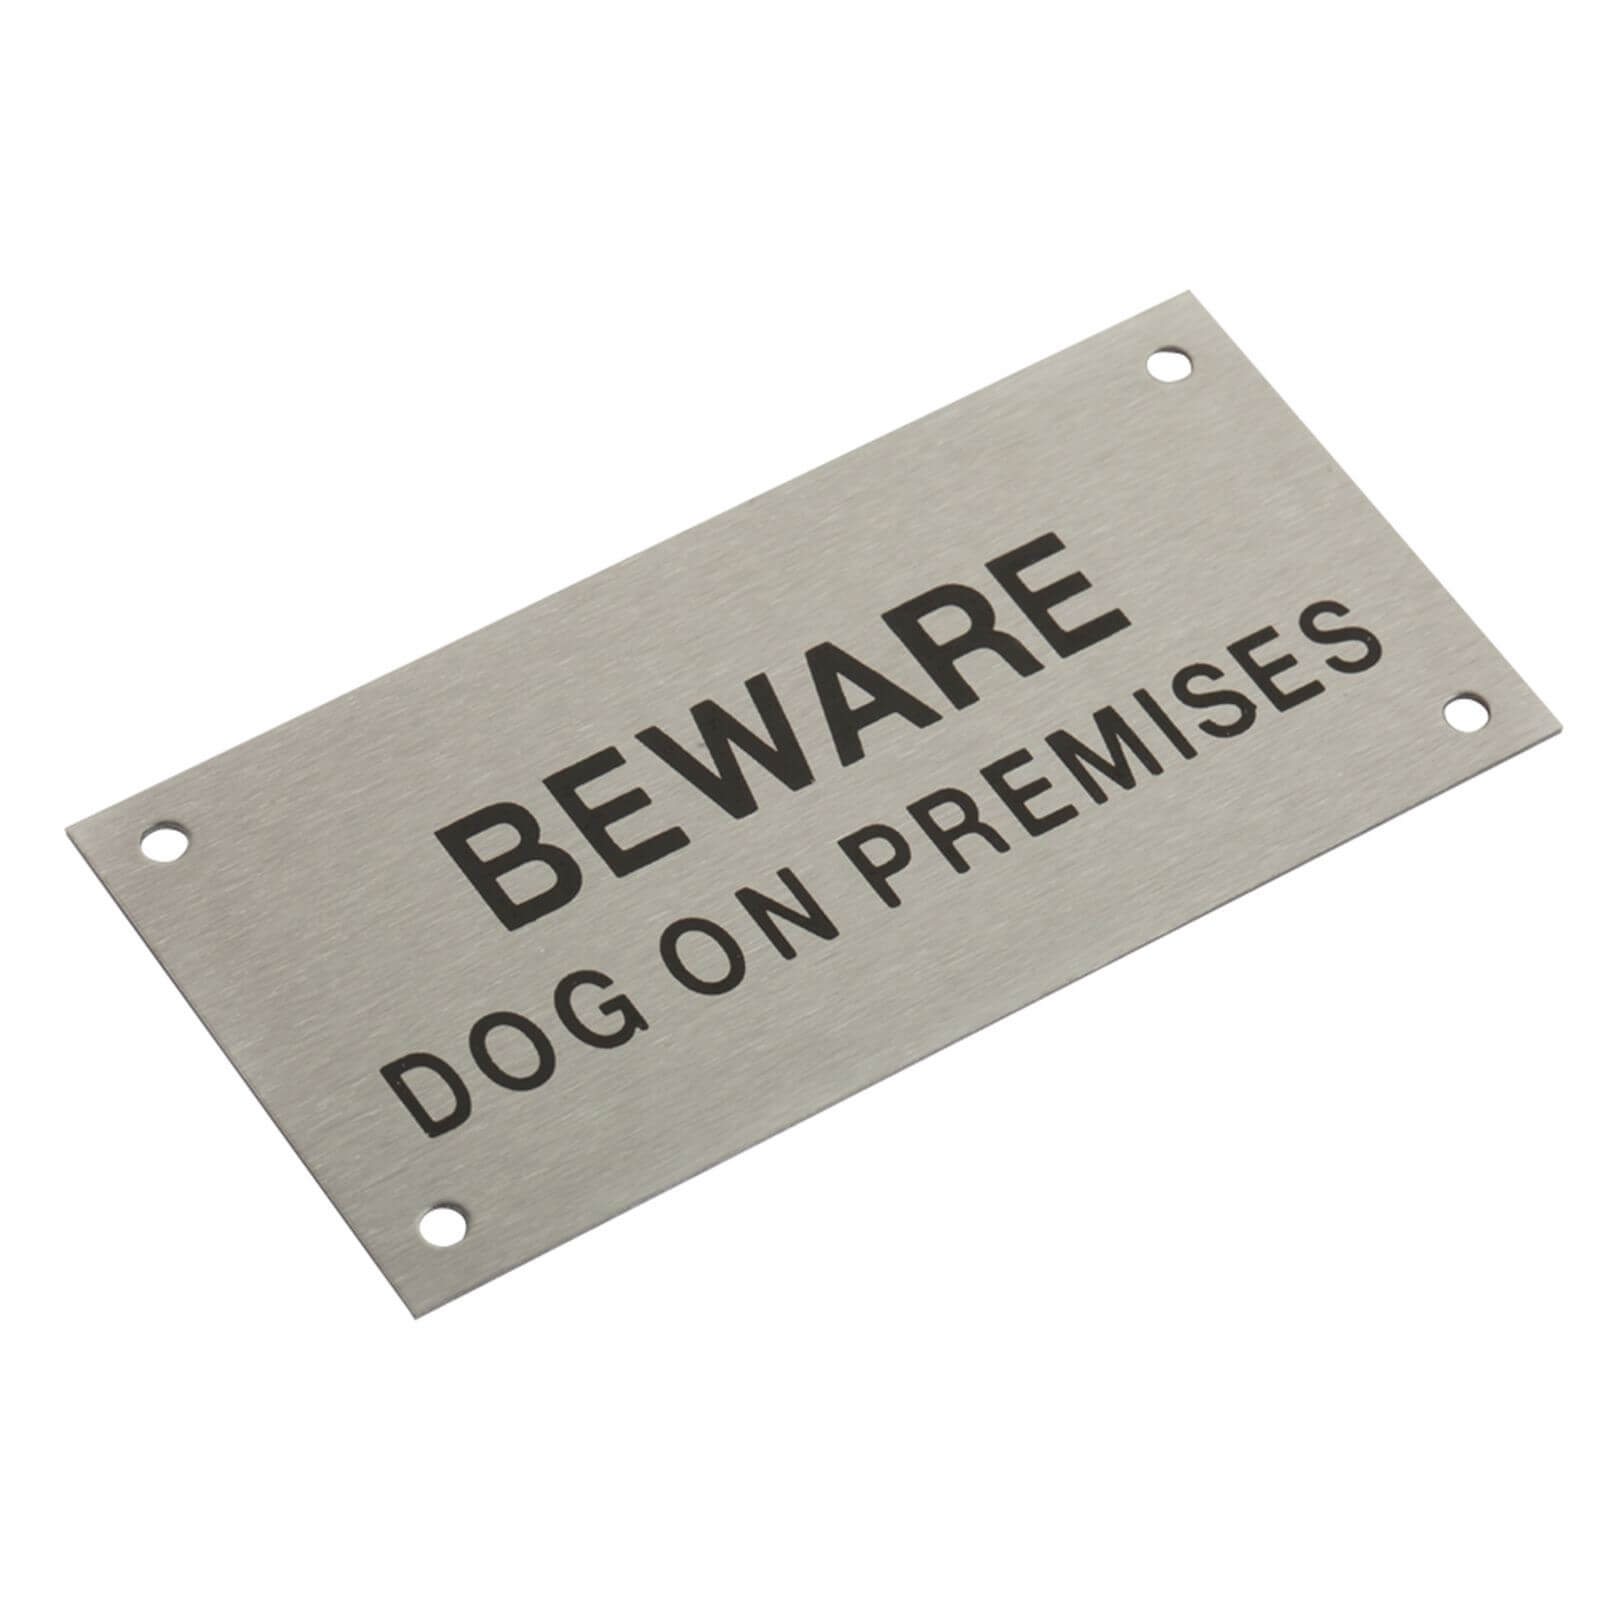 Stainless Steel Beware Dog On Premises Sign - 95 x 47mm